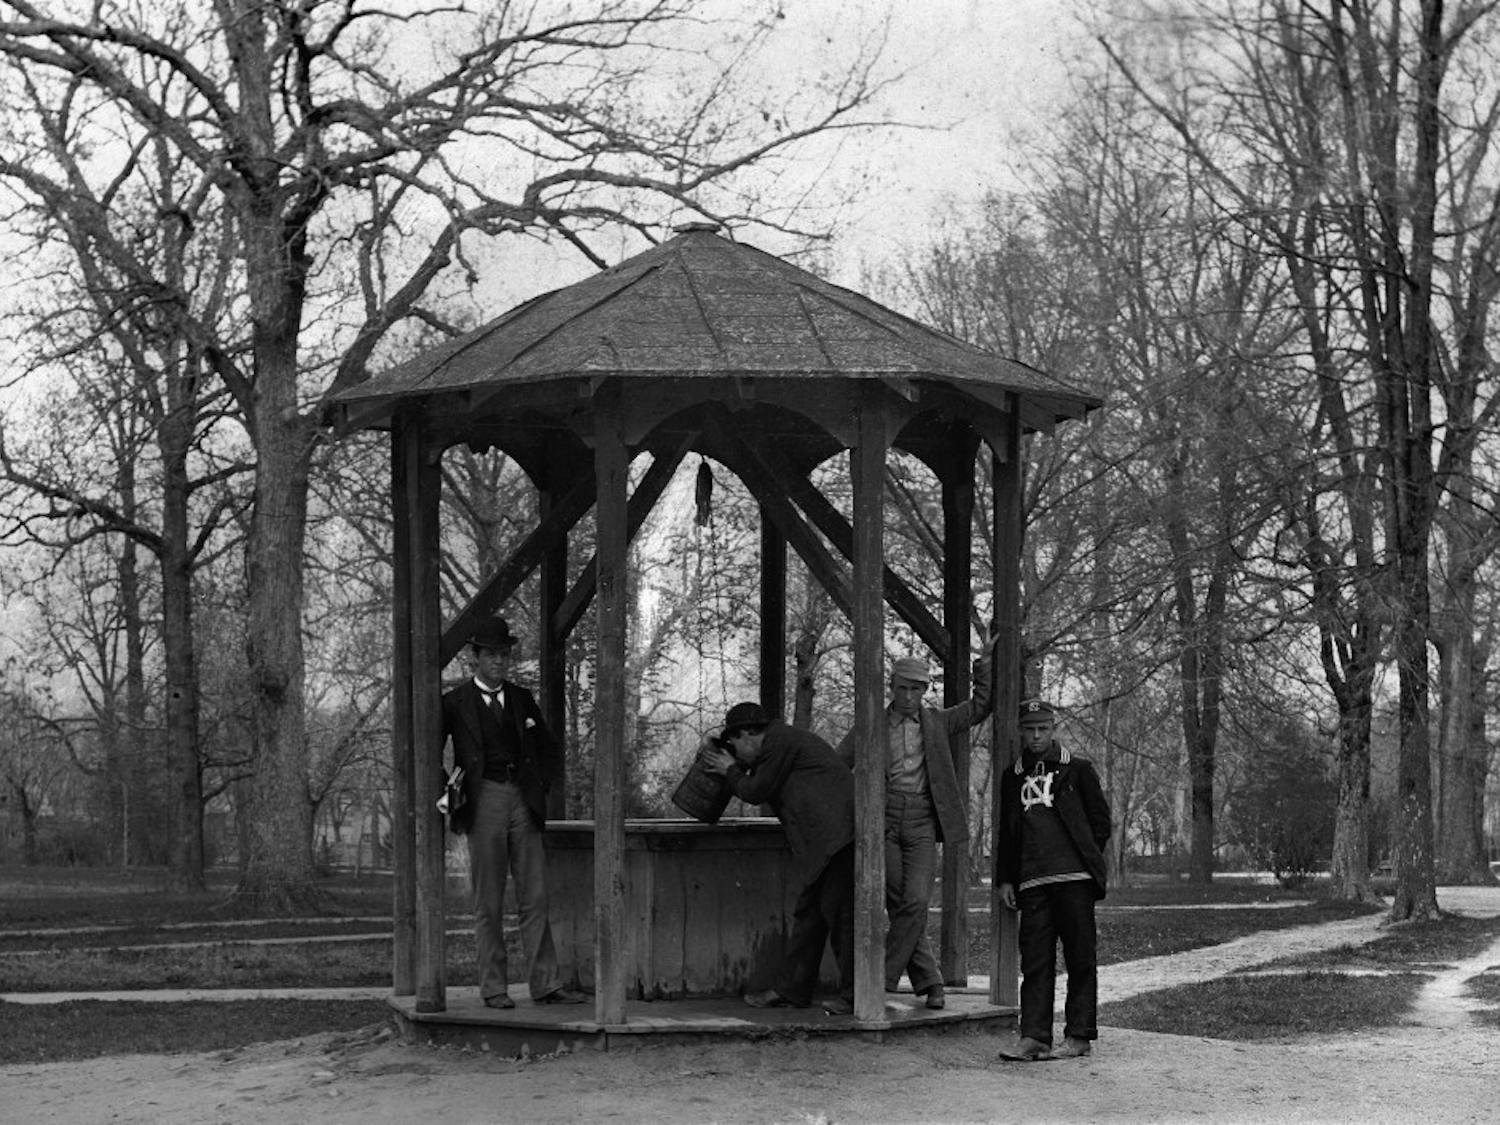 "Old" Old Well, University of North Carolina at Chapel Hill, 189